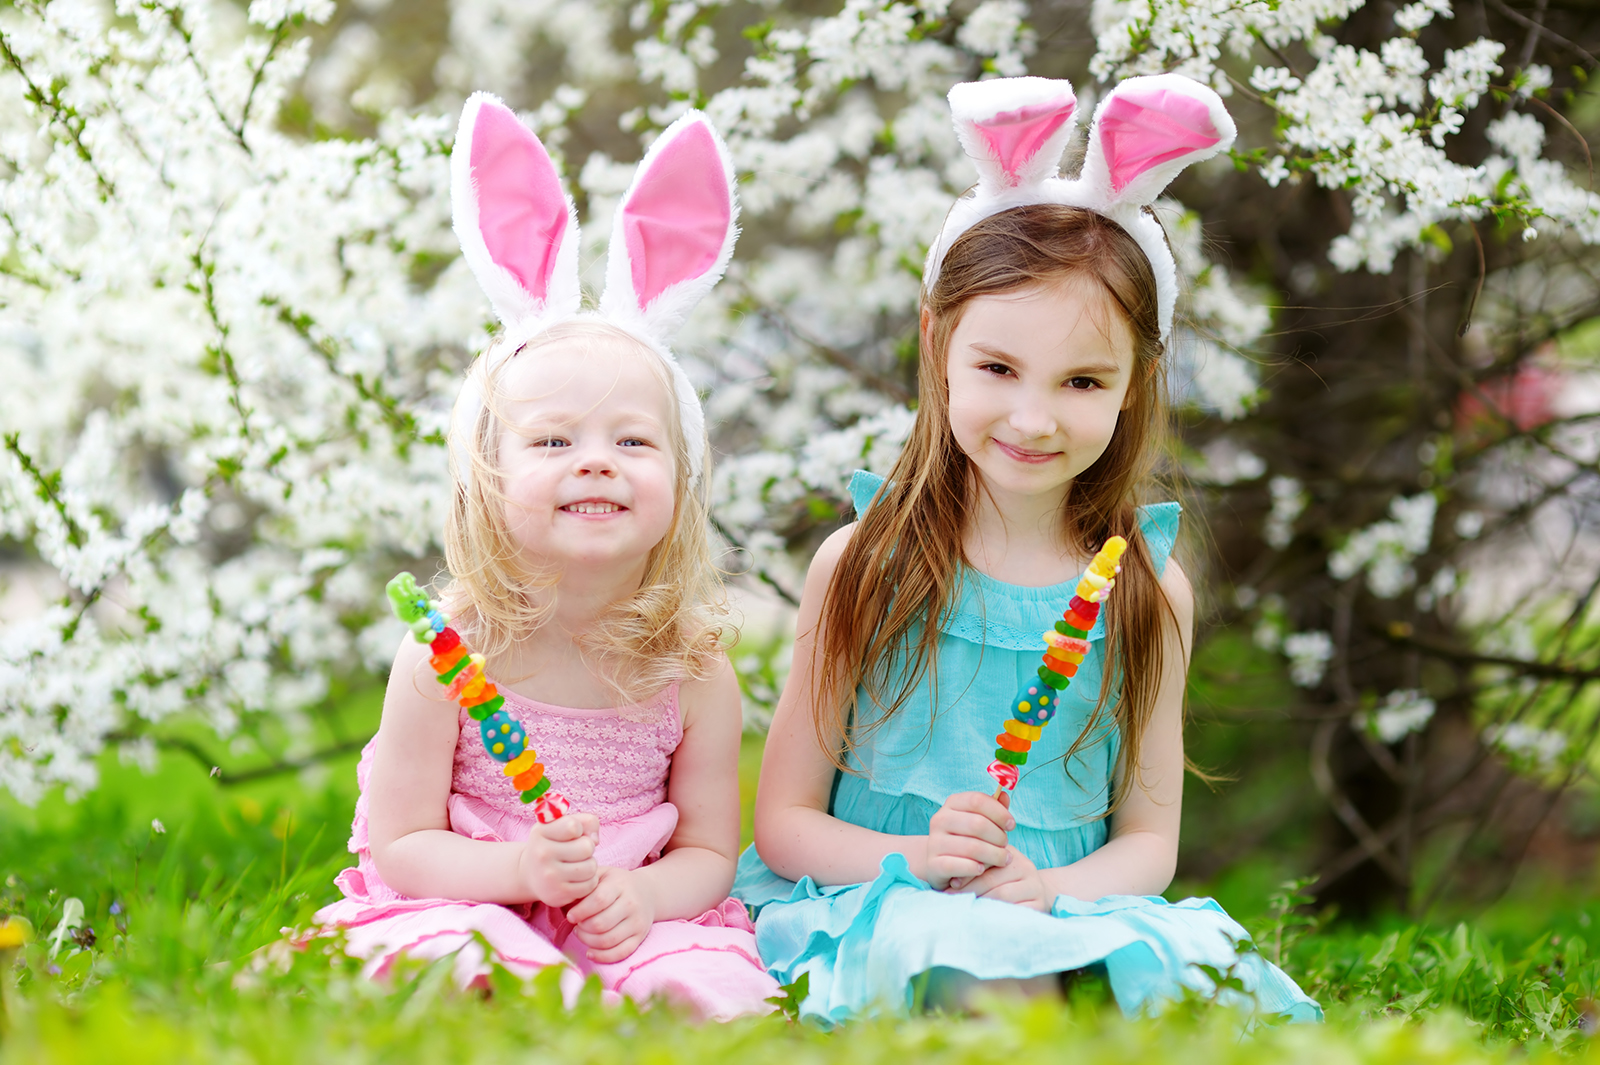 Featured image for “Ask Your El Paso Dentist: How to Choose Easter Candy for Better Dental Health”